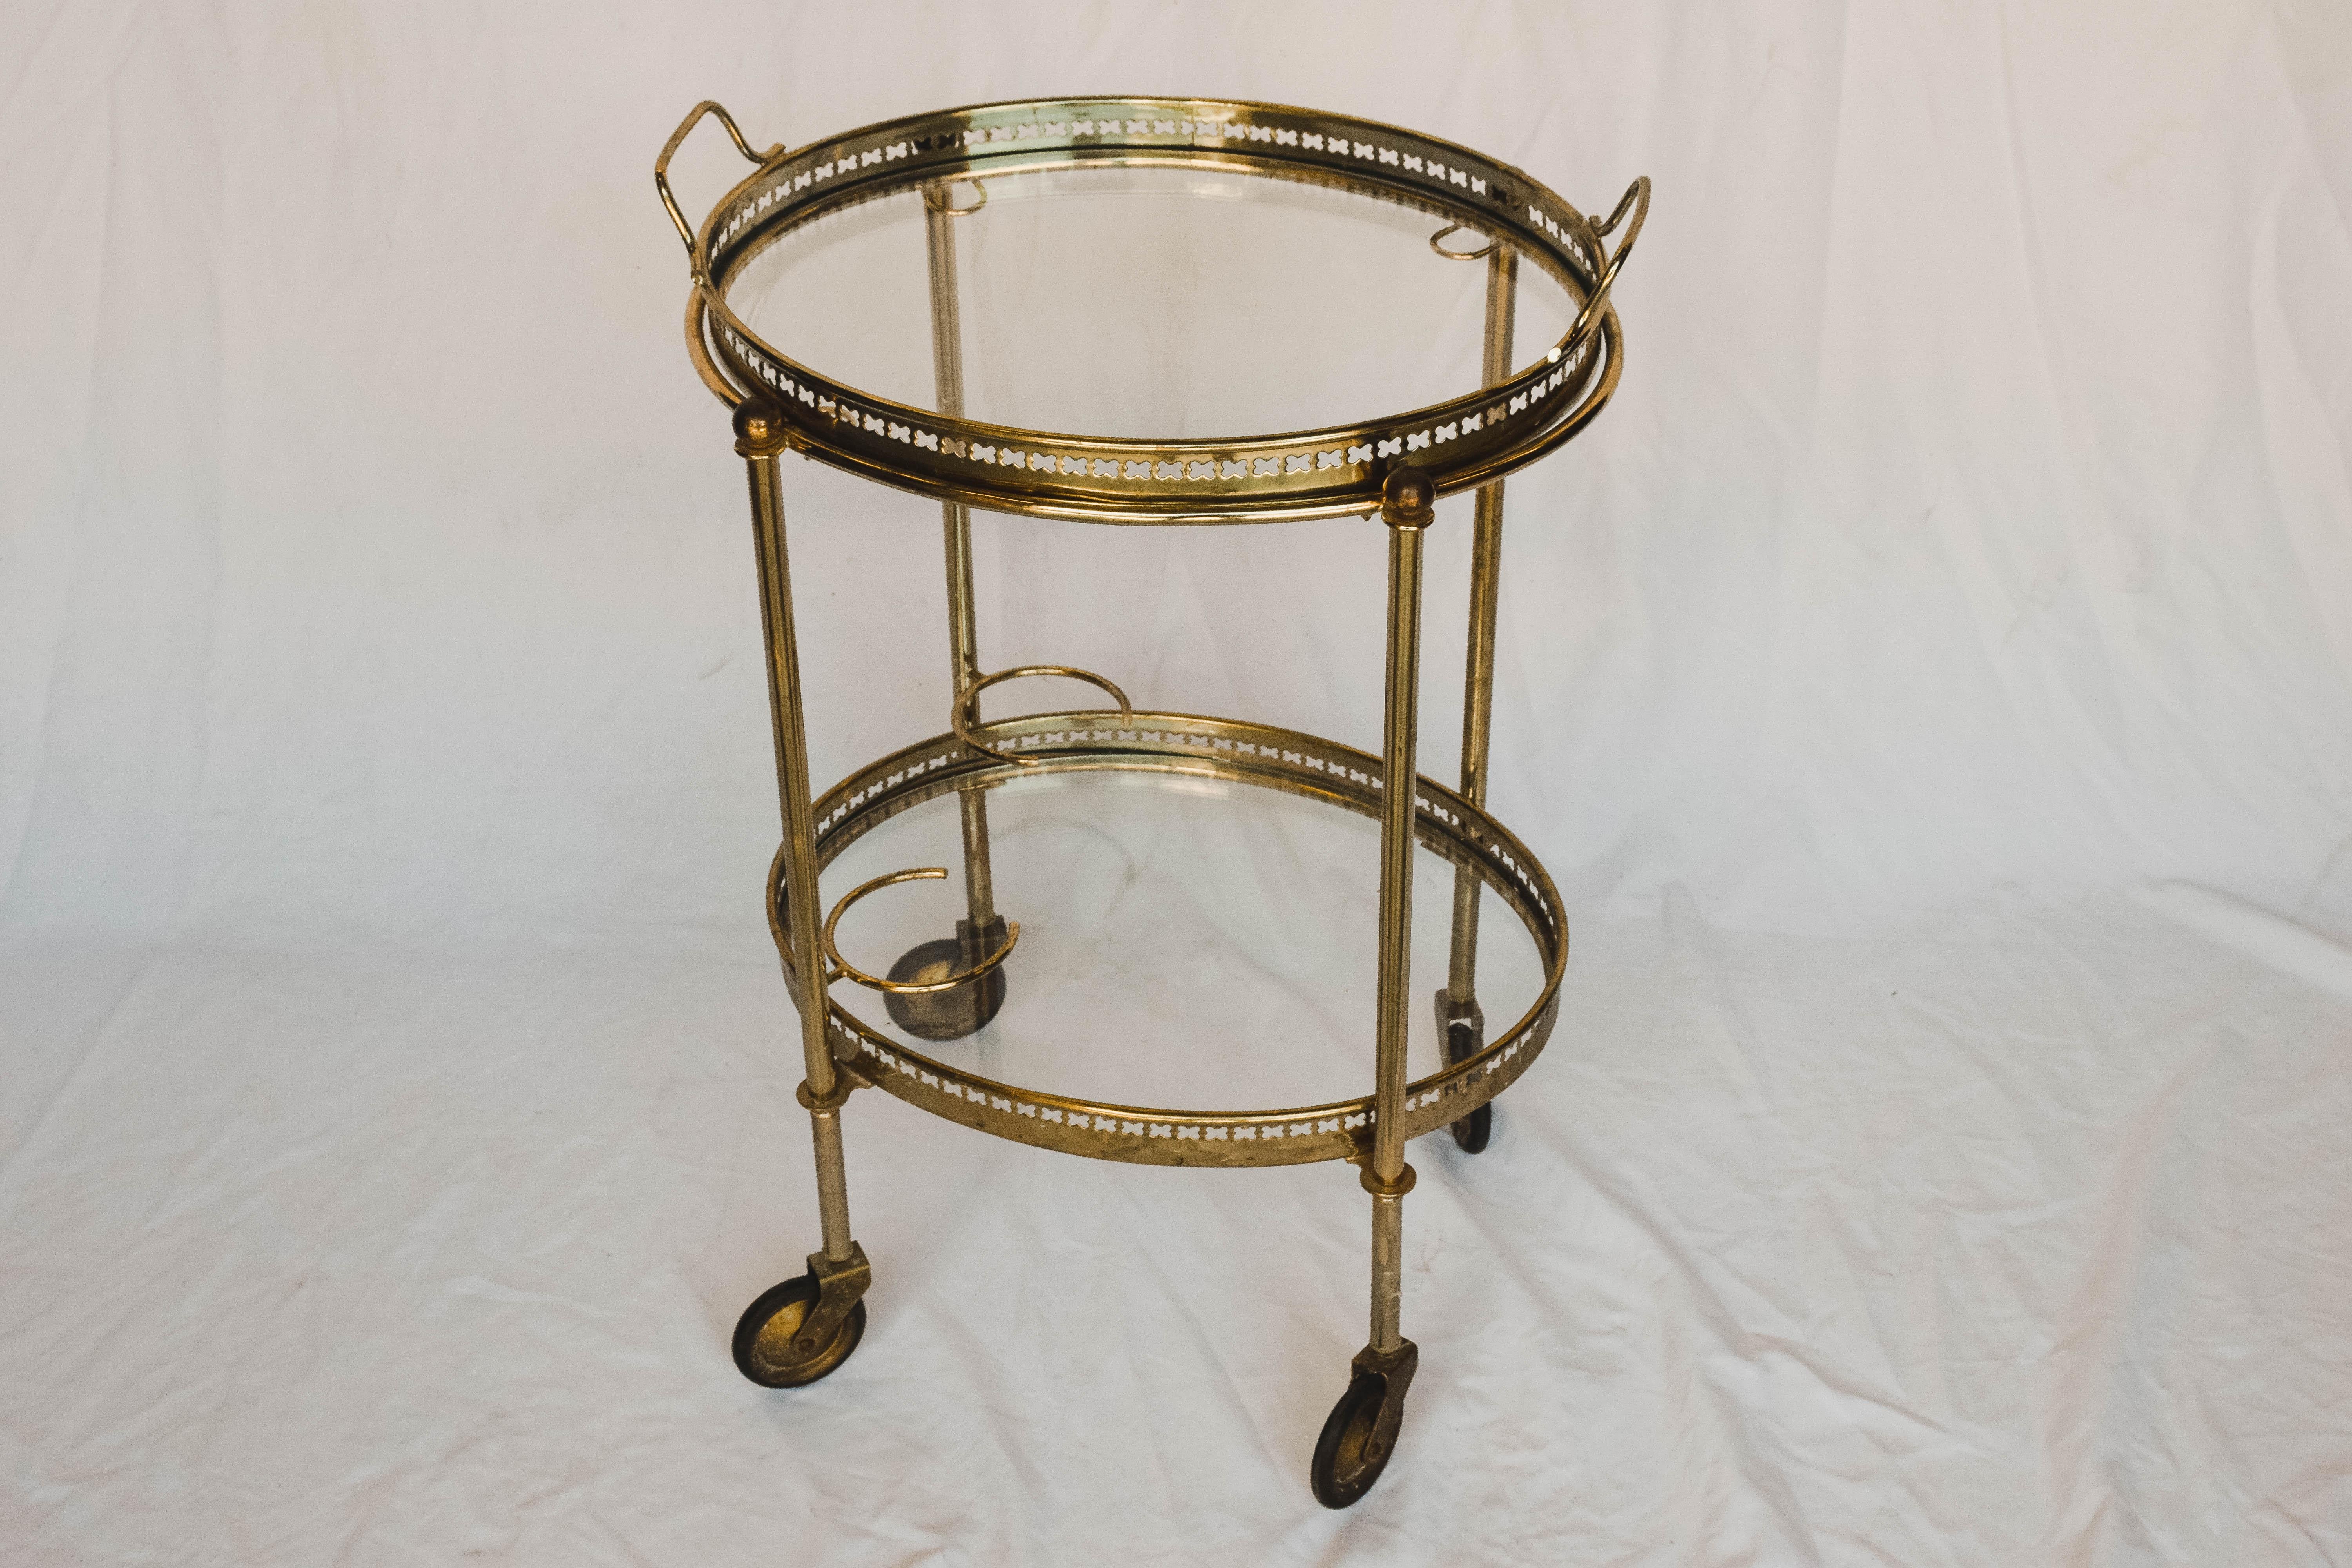 Stylish oval brass bar cart - Serving trolley with removable tray and bottle holders.
This two-tier drink trolley has two original clear glass shelves the upper one is also a removable serving tray with handles to carry. This bar cart has stylish